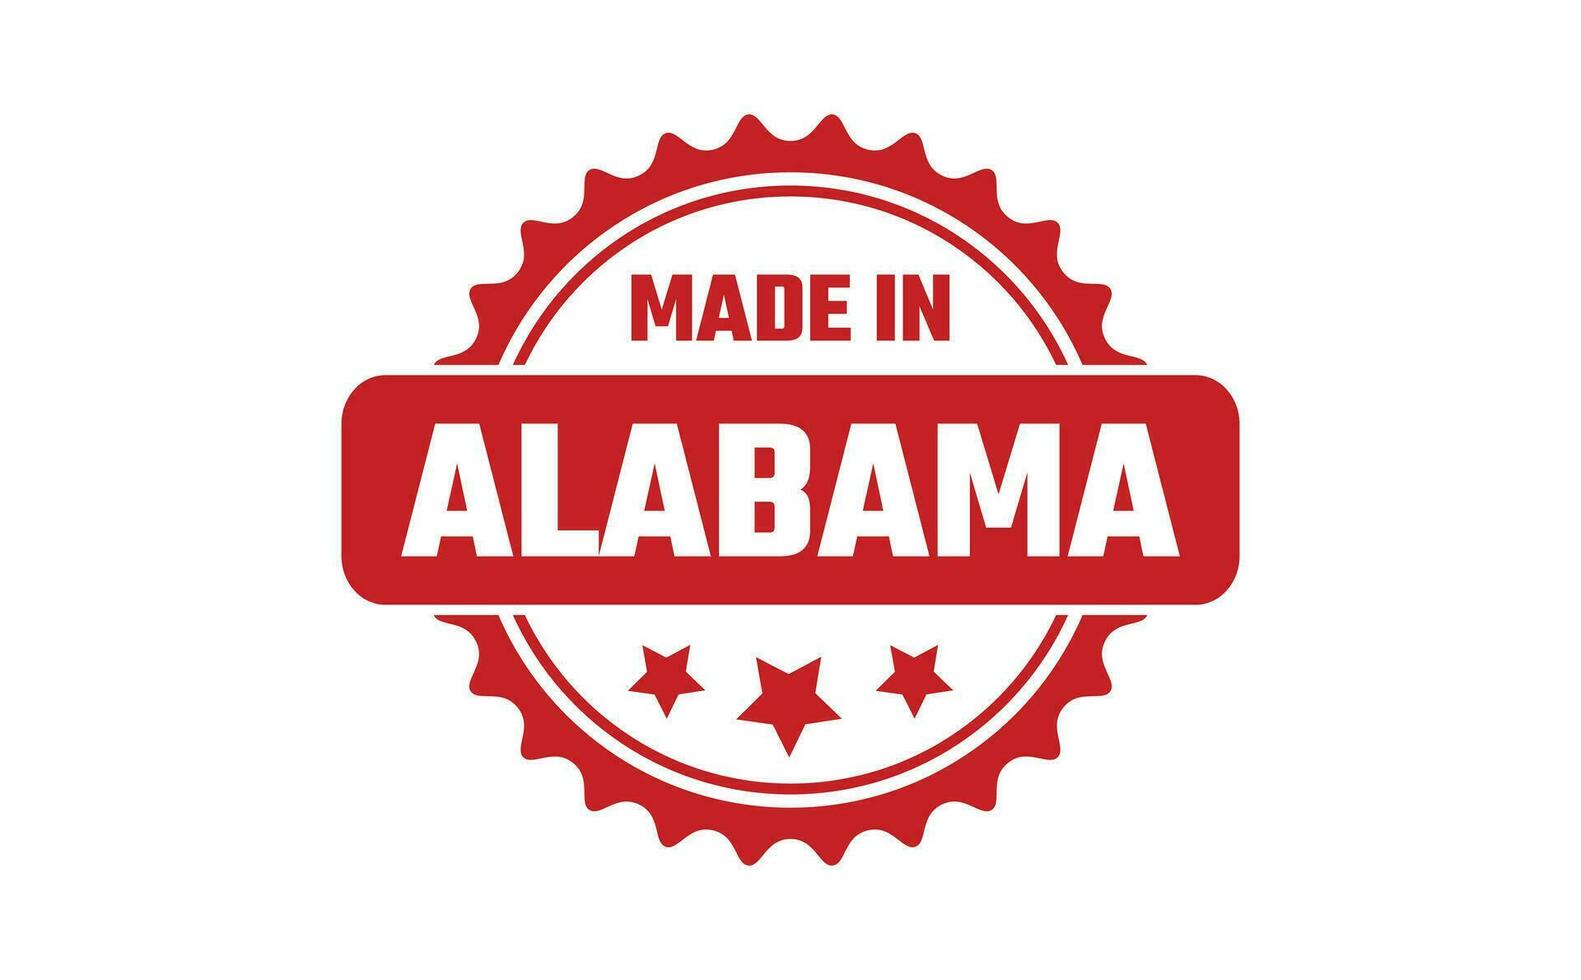 Made In Alabama Rubber Stamp vector